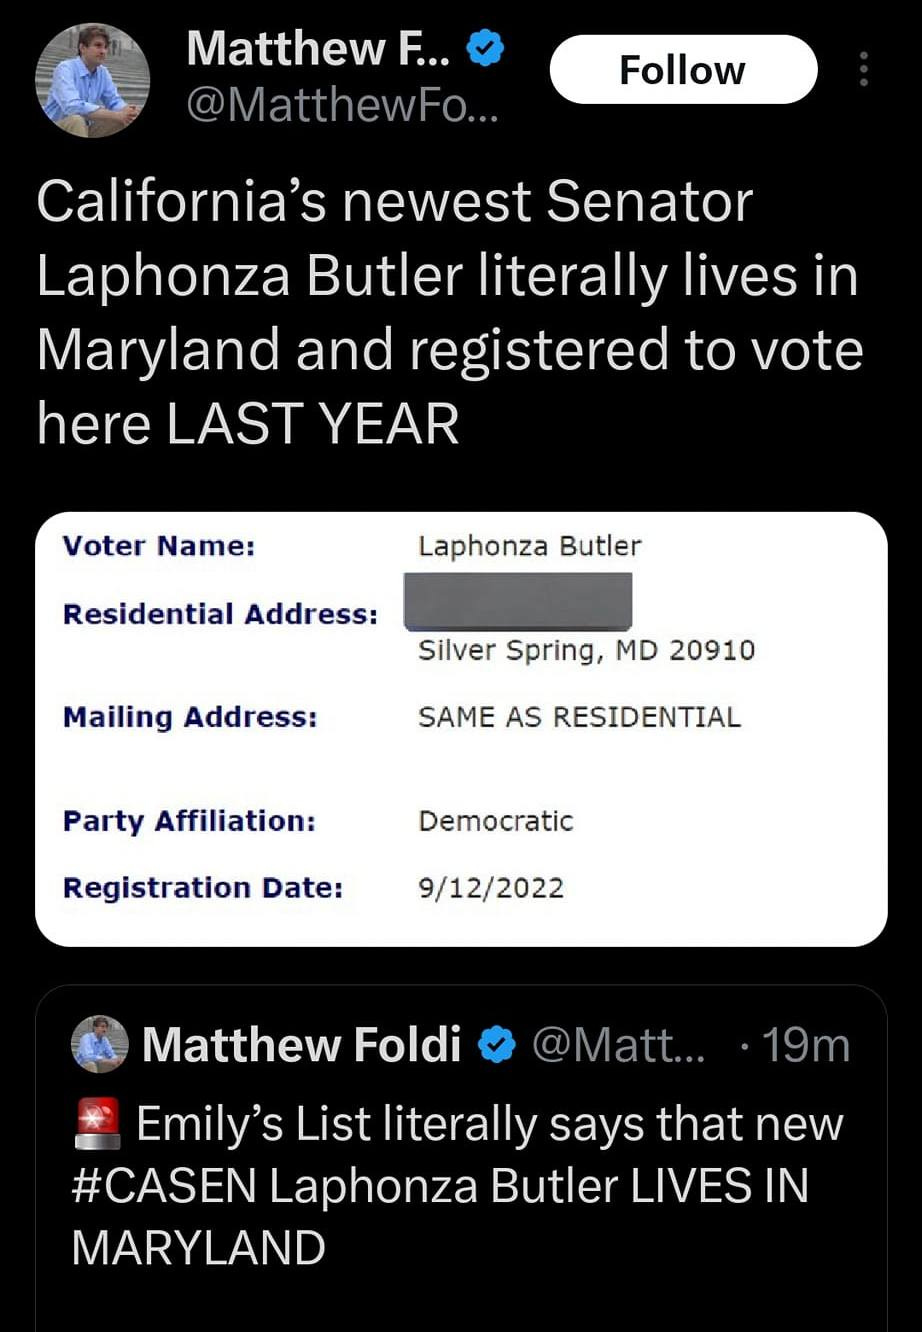 May be an image of text that says '10:29 5G. 18% Post Mollierp Matthew @MatthewF Follow California's newest Senator Laphonza Butler literally lives in Maryland and registered to vote here LAST YEAR Voter Name: Laphonza Butler Residential Address: Mailing Address: Silver Spring, MD 20910 SAME AS RESIDENTIAL Party Affiliation: Democratic Registration Date: 9/12/2022 19m Matthew Foldi @Matt... Emily's List literally says that new #CASEN Laphonza Butler LIVES IN MARYLAND emilyslist.org/our-leadership/ Post your rep'